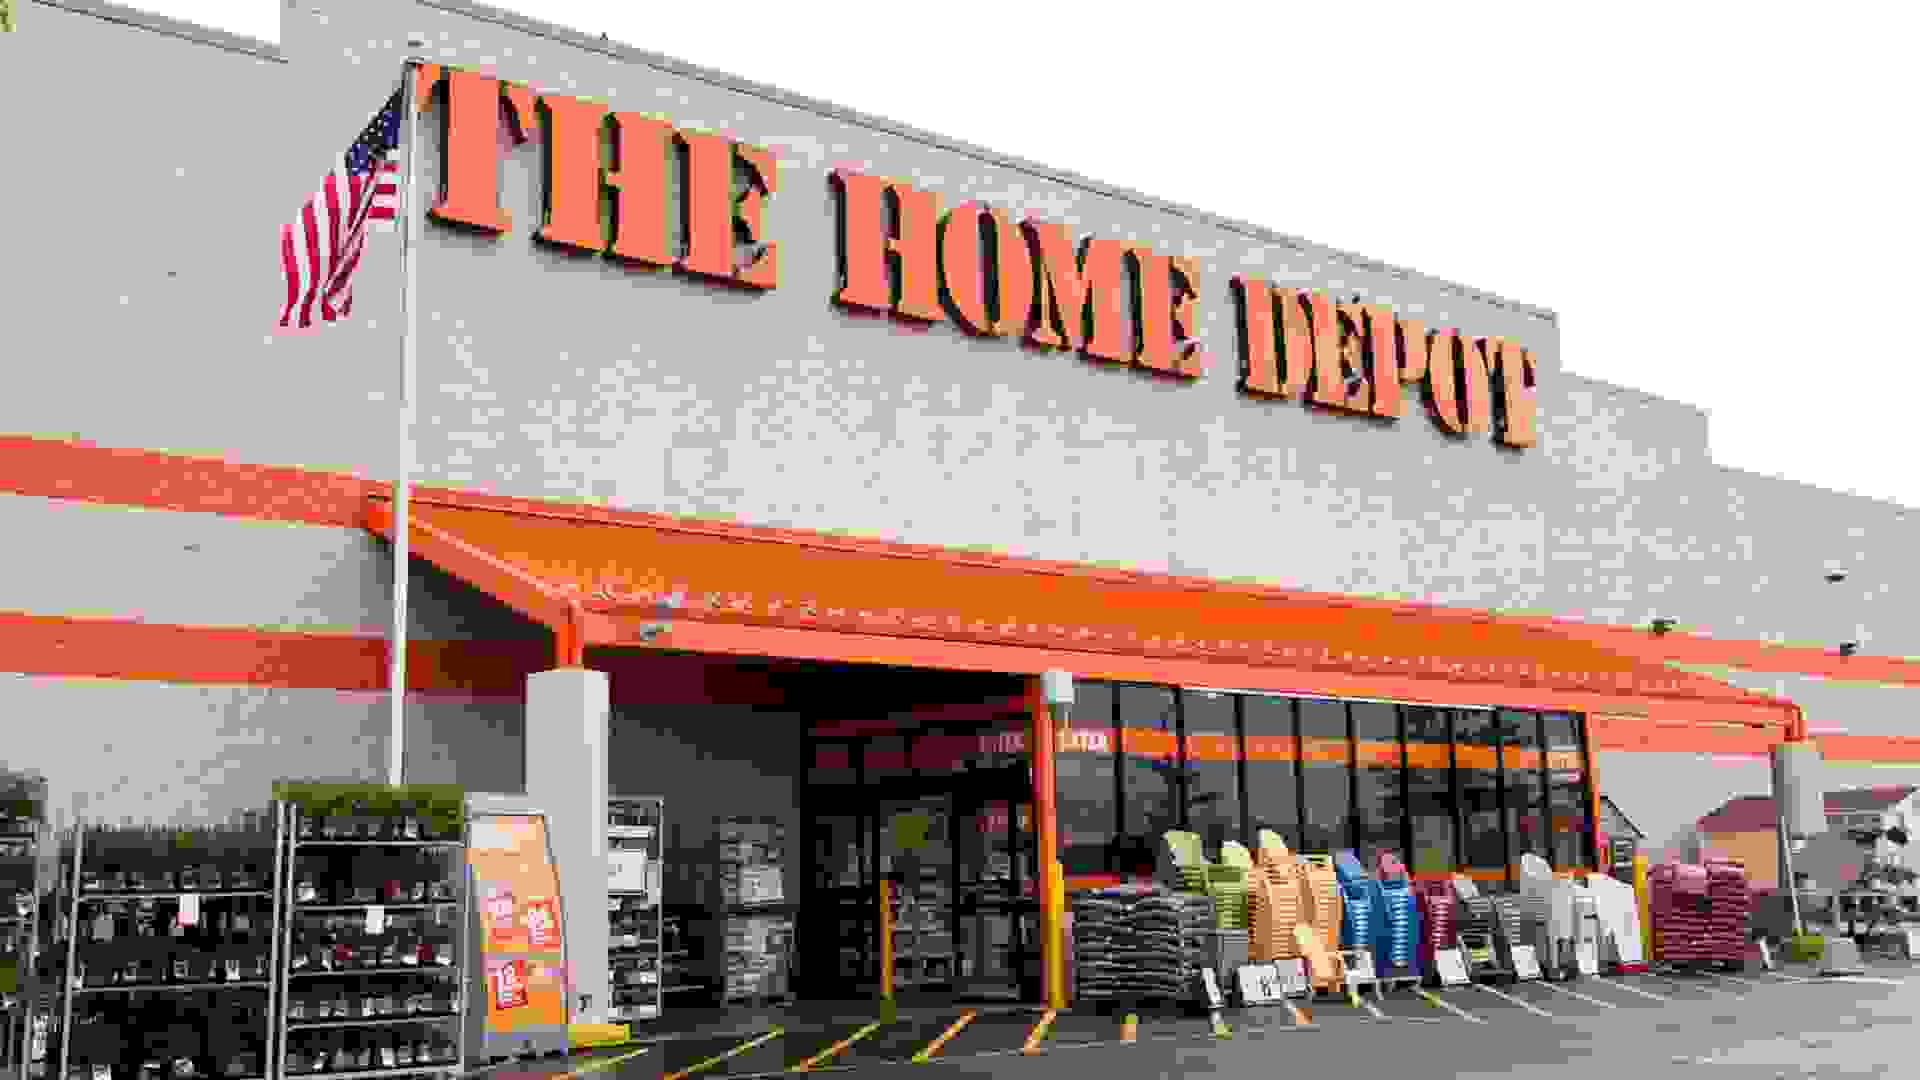 Mount Prospect, IL, USA - May 29, 2011: Entrance of The Home Depot home improvement store in Mount Prospect, IL, a suburb of Chicago.